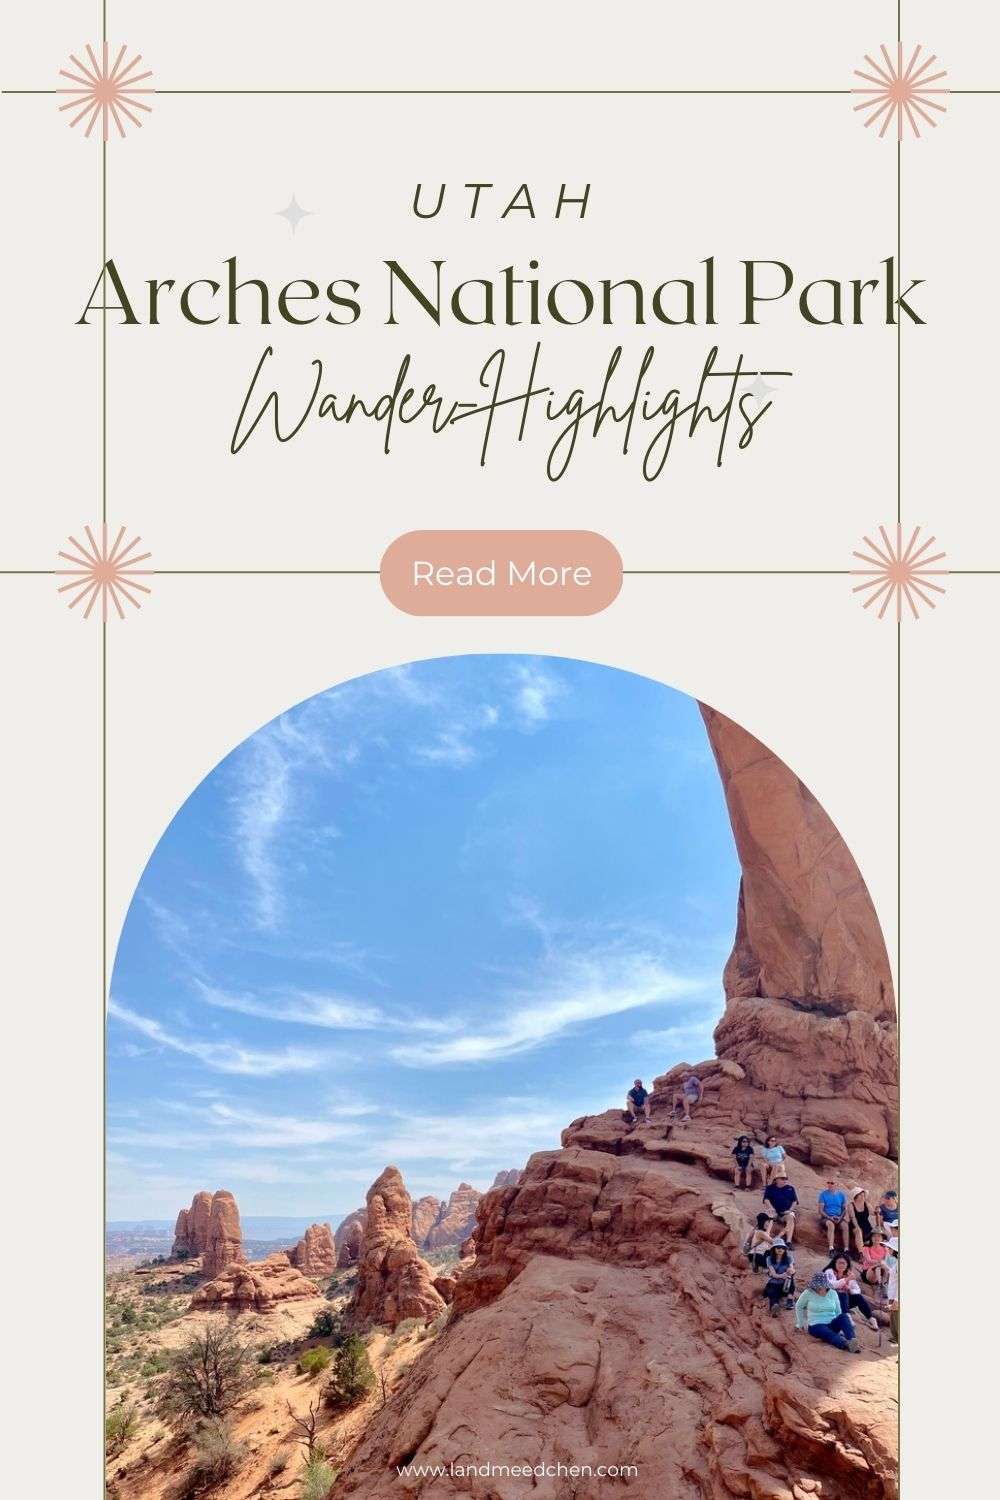 Wander Highlights Arches National Park